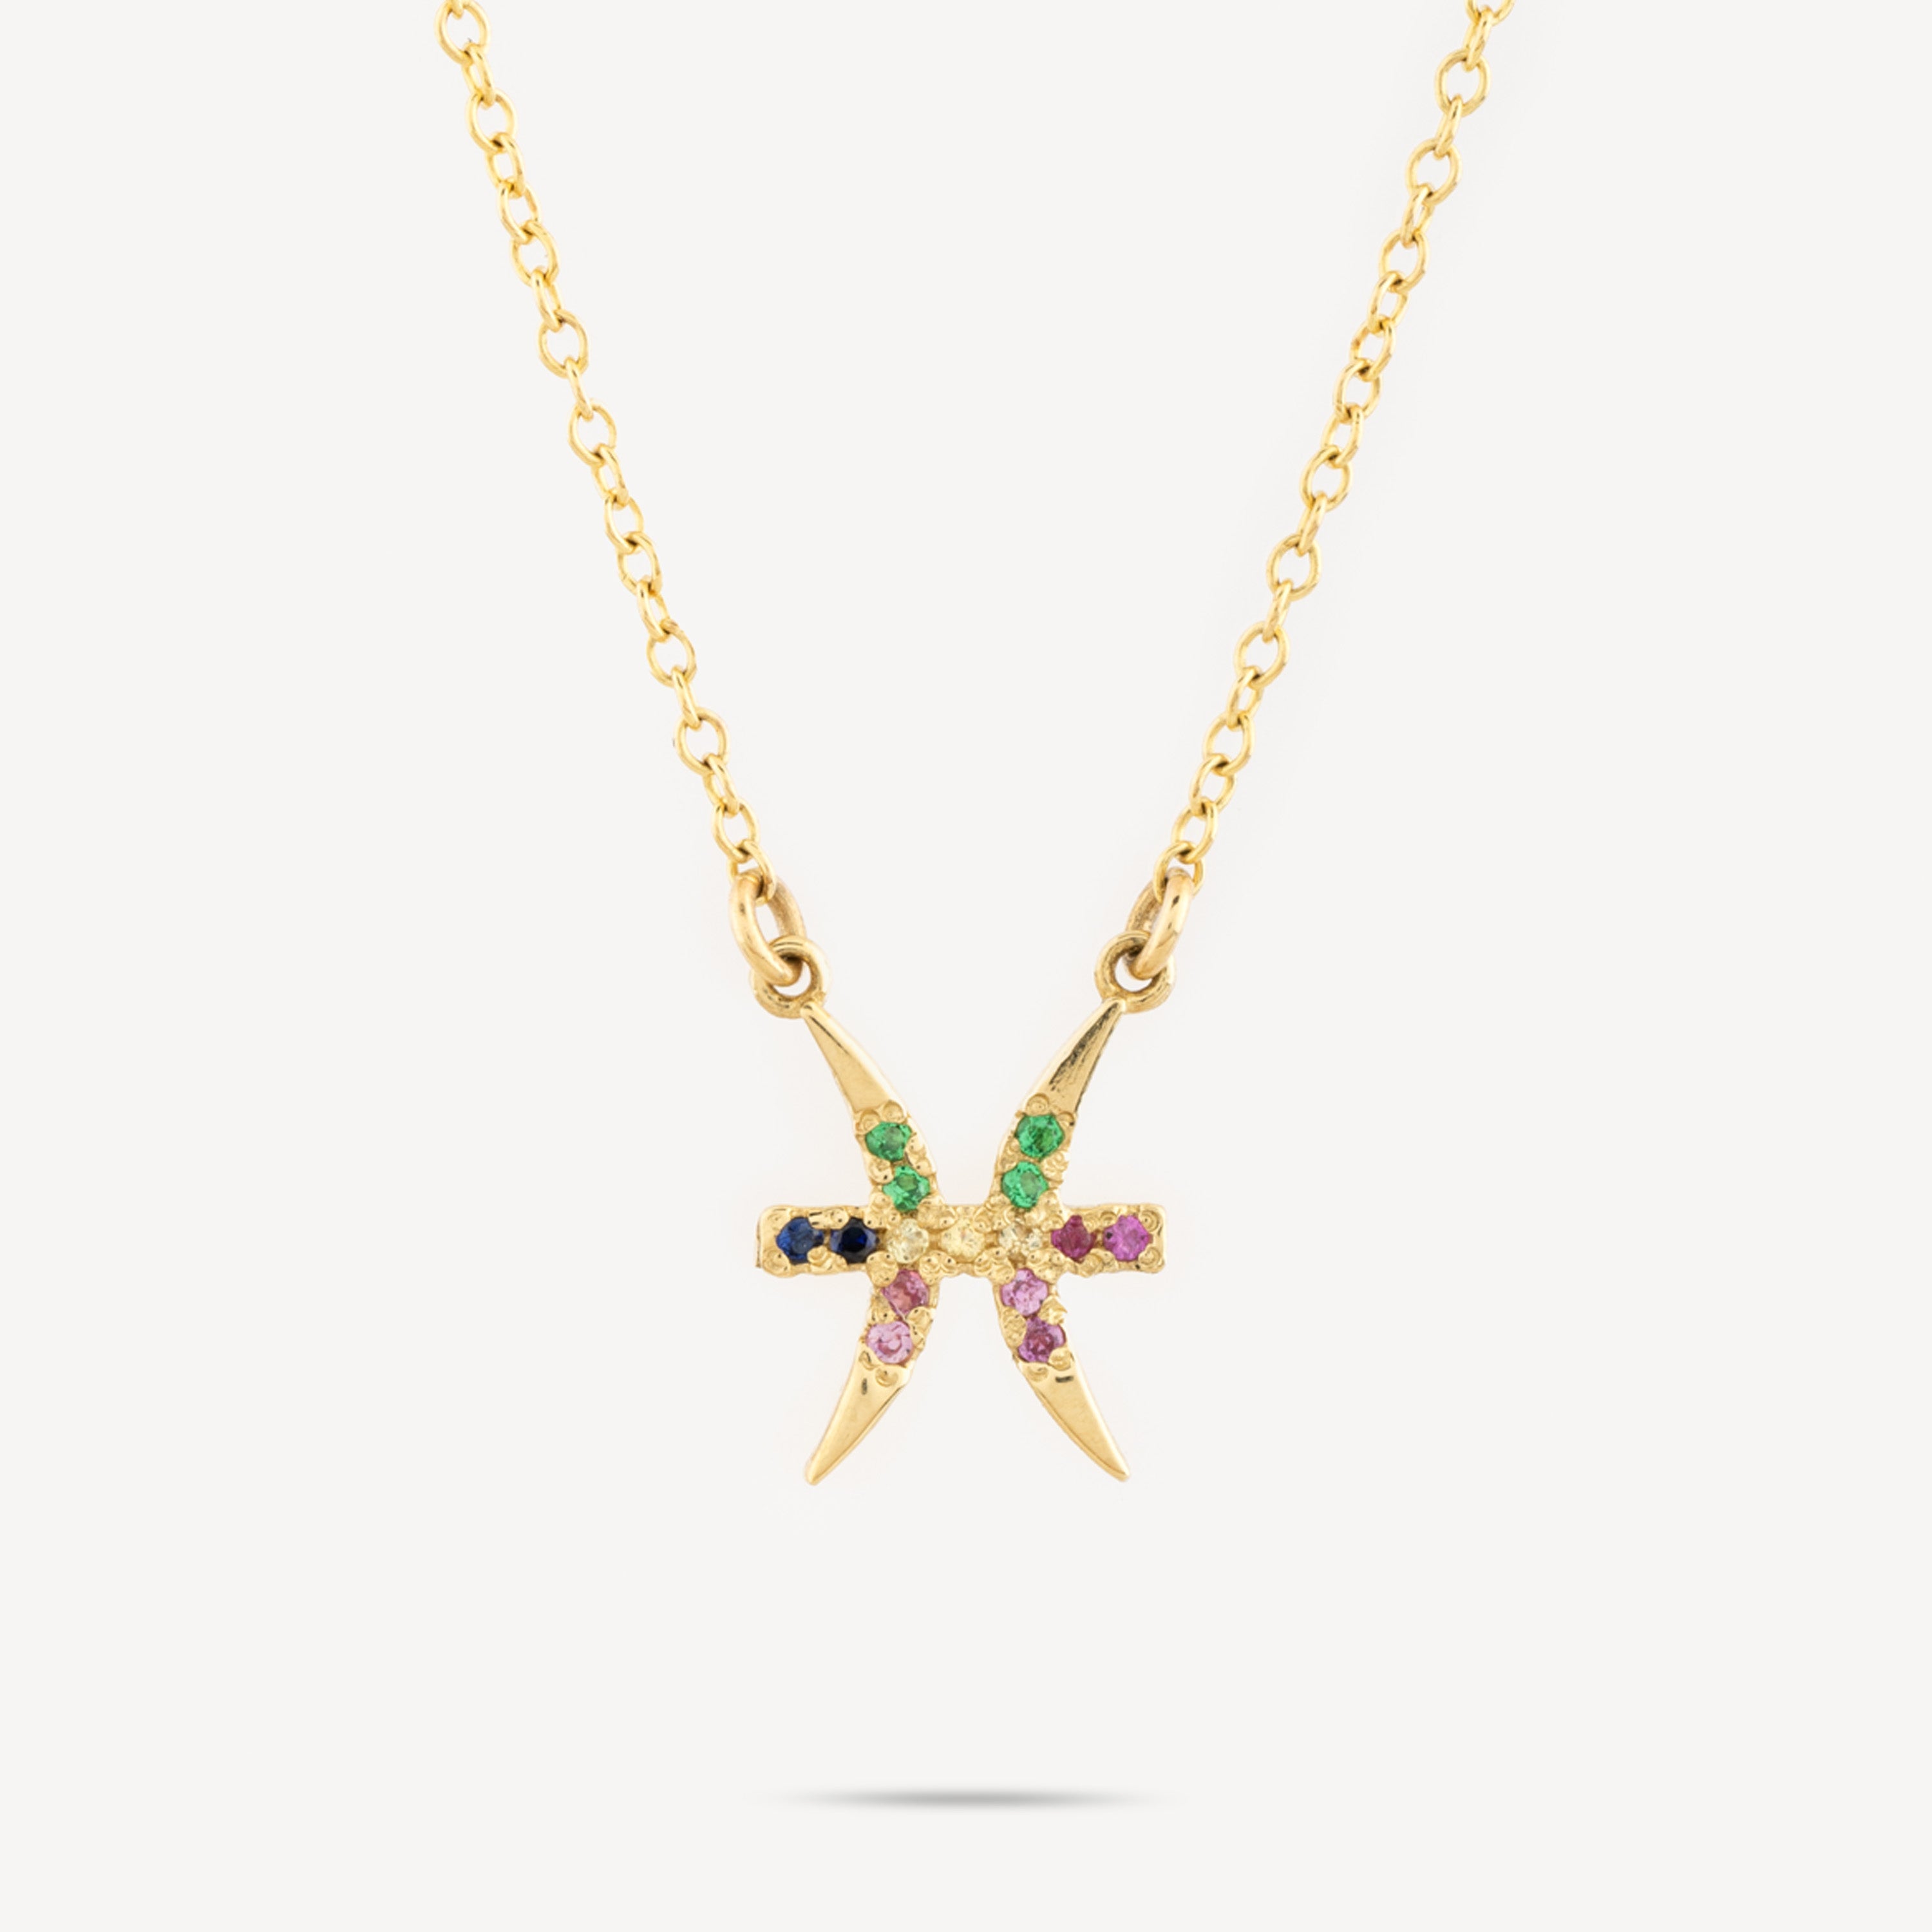 Pisces Zodiac Necklace with Multicolored Sapphires